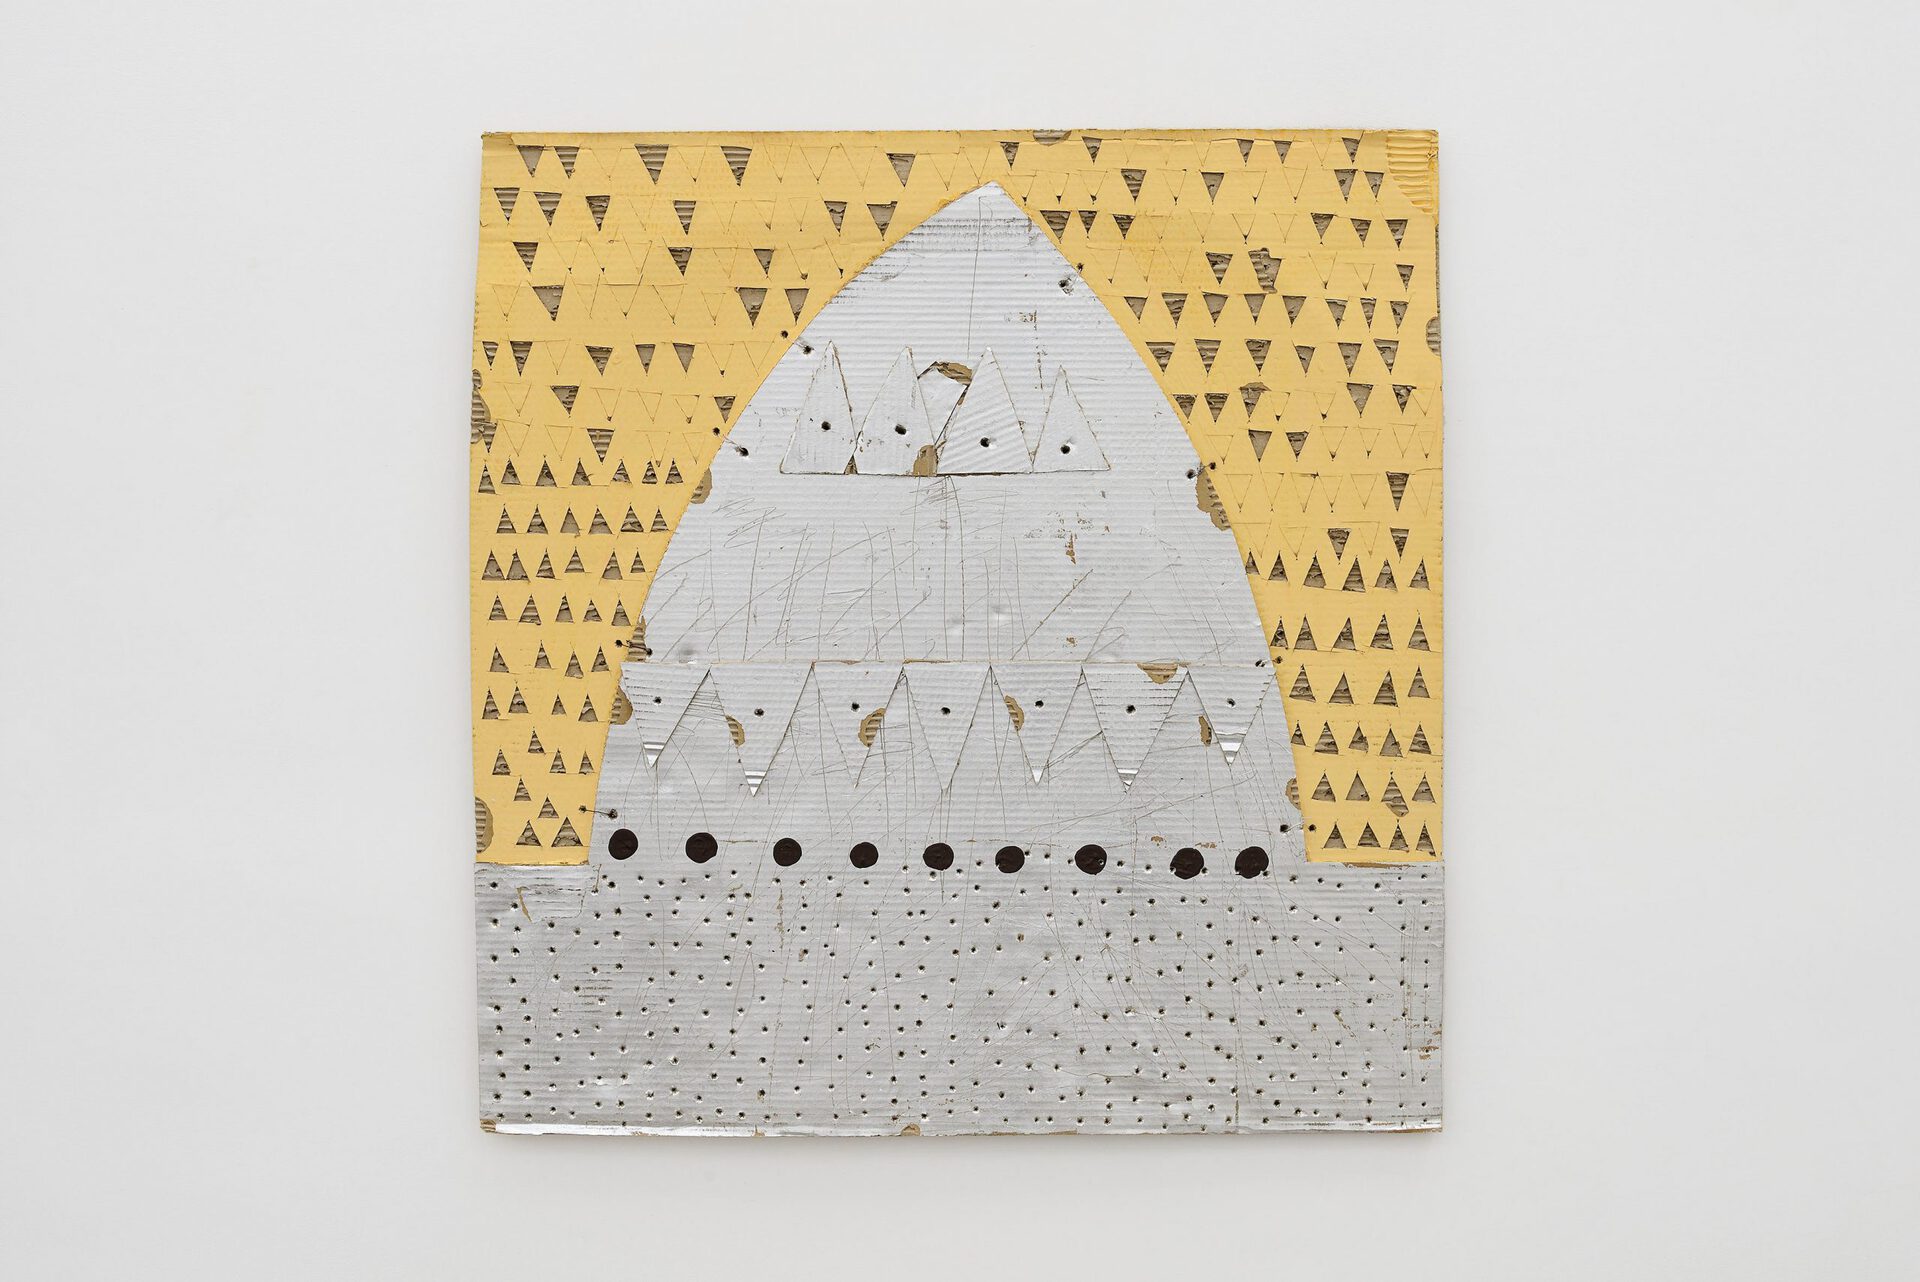 09. Shadi Yasrebi, Orange Afternoon, 2022, acrylic, silver leaves, wire on cardboard, 100 x 97 x 2,5 cm, courtesy of of the artist and ADA, Rome